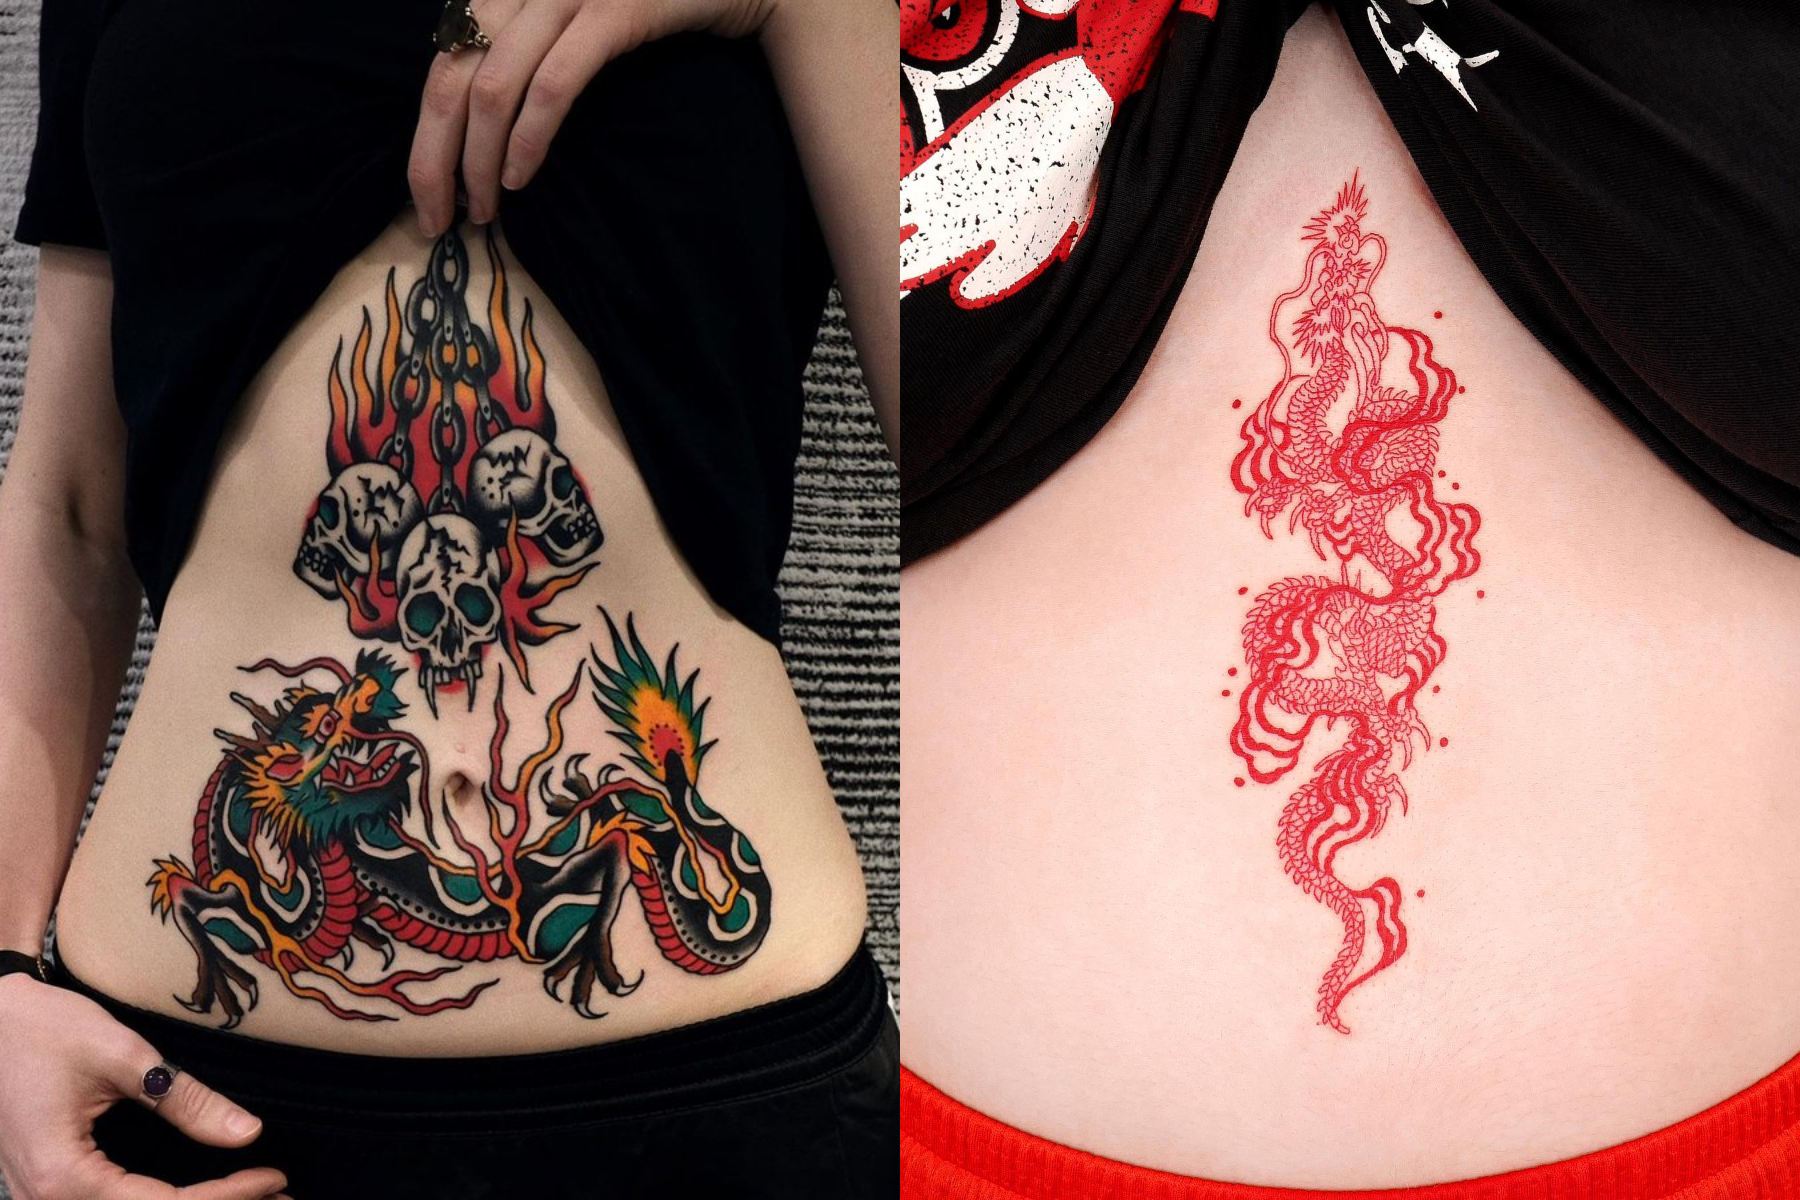 A lady with a coloured dragon tattoo (L) and another one with a red dragon tattoo (R)